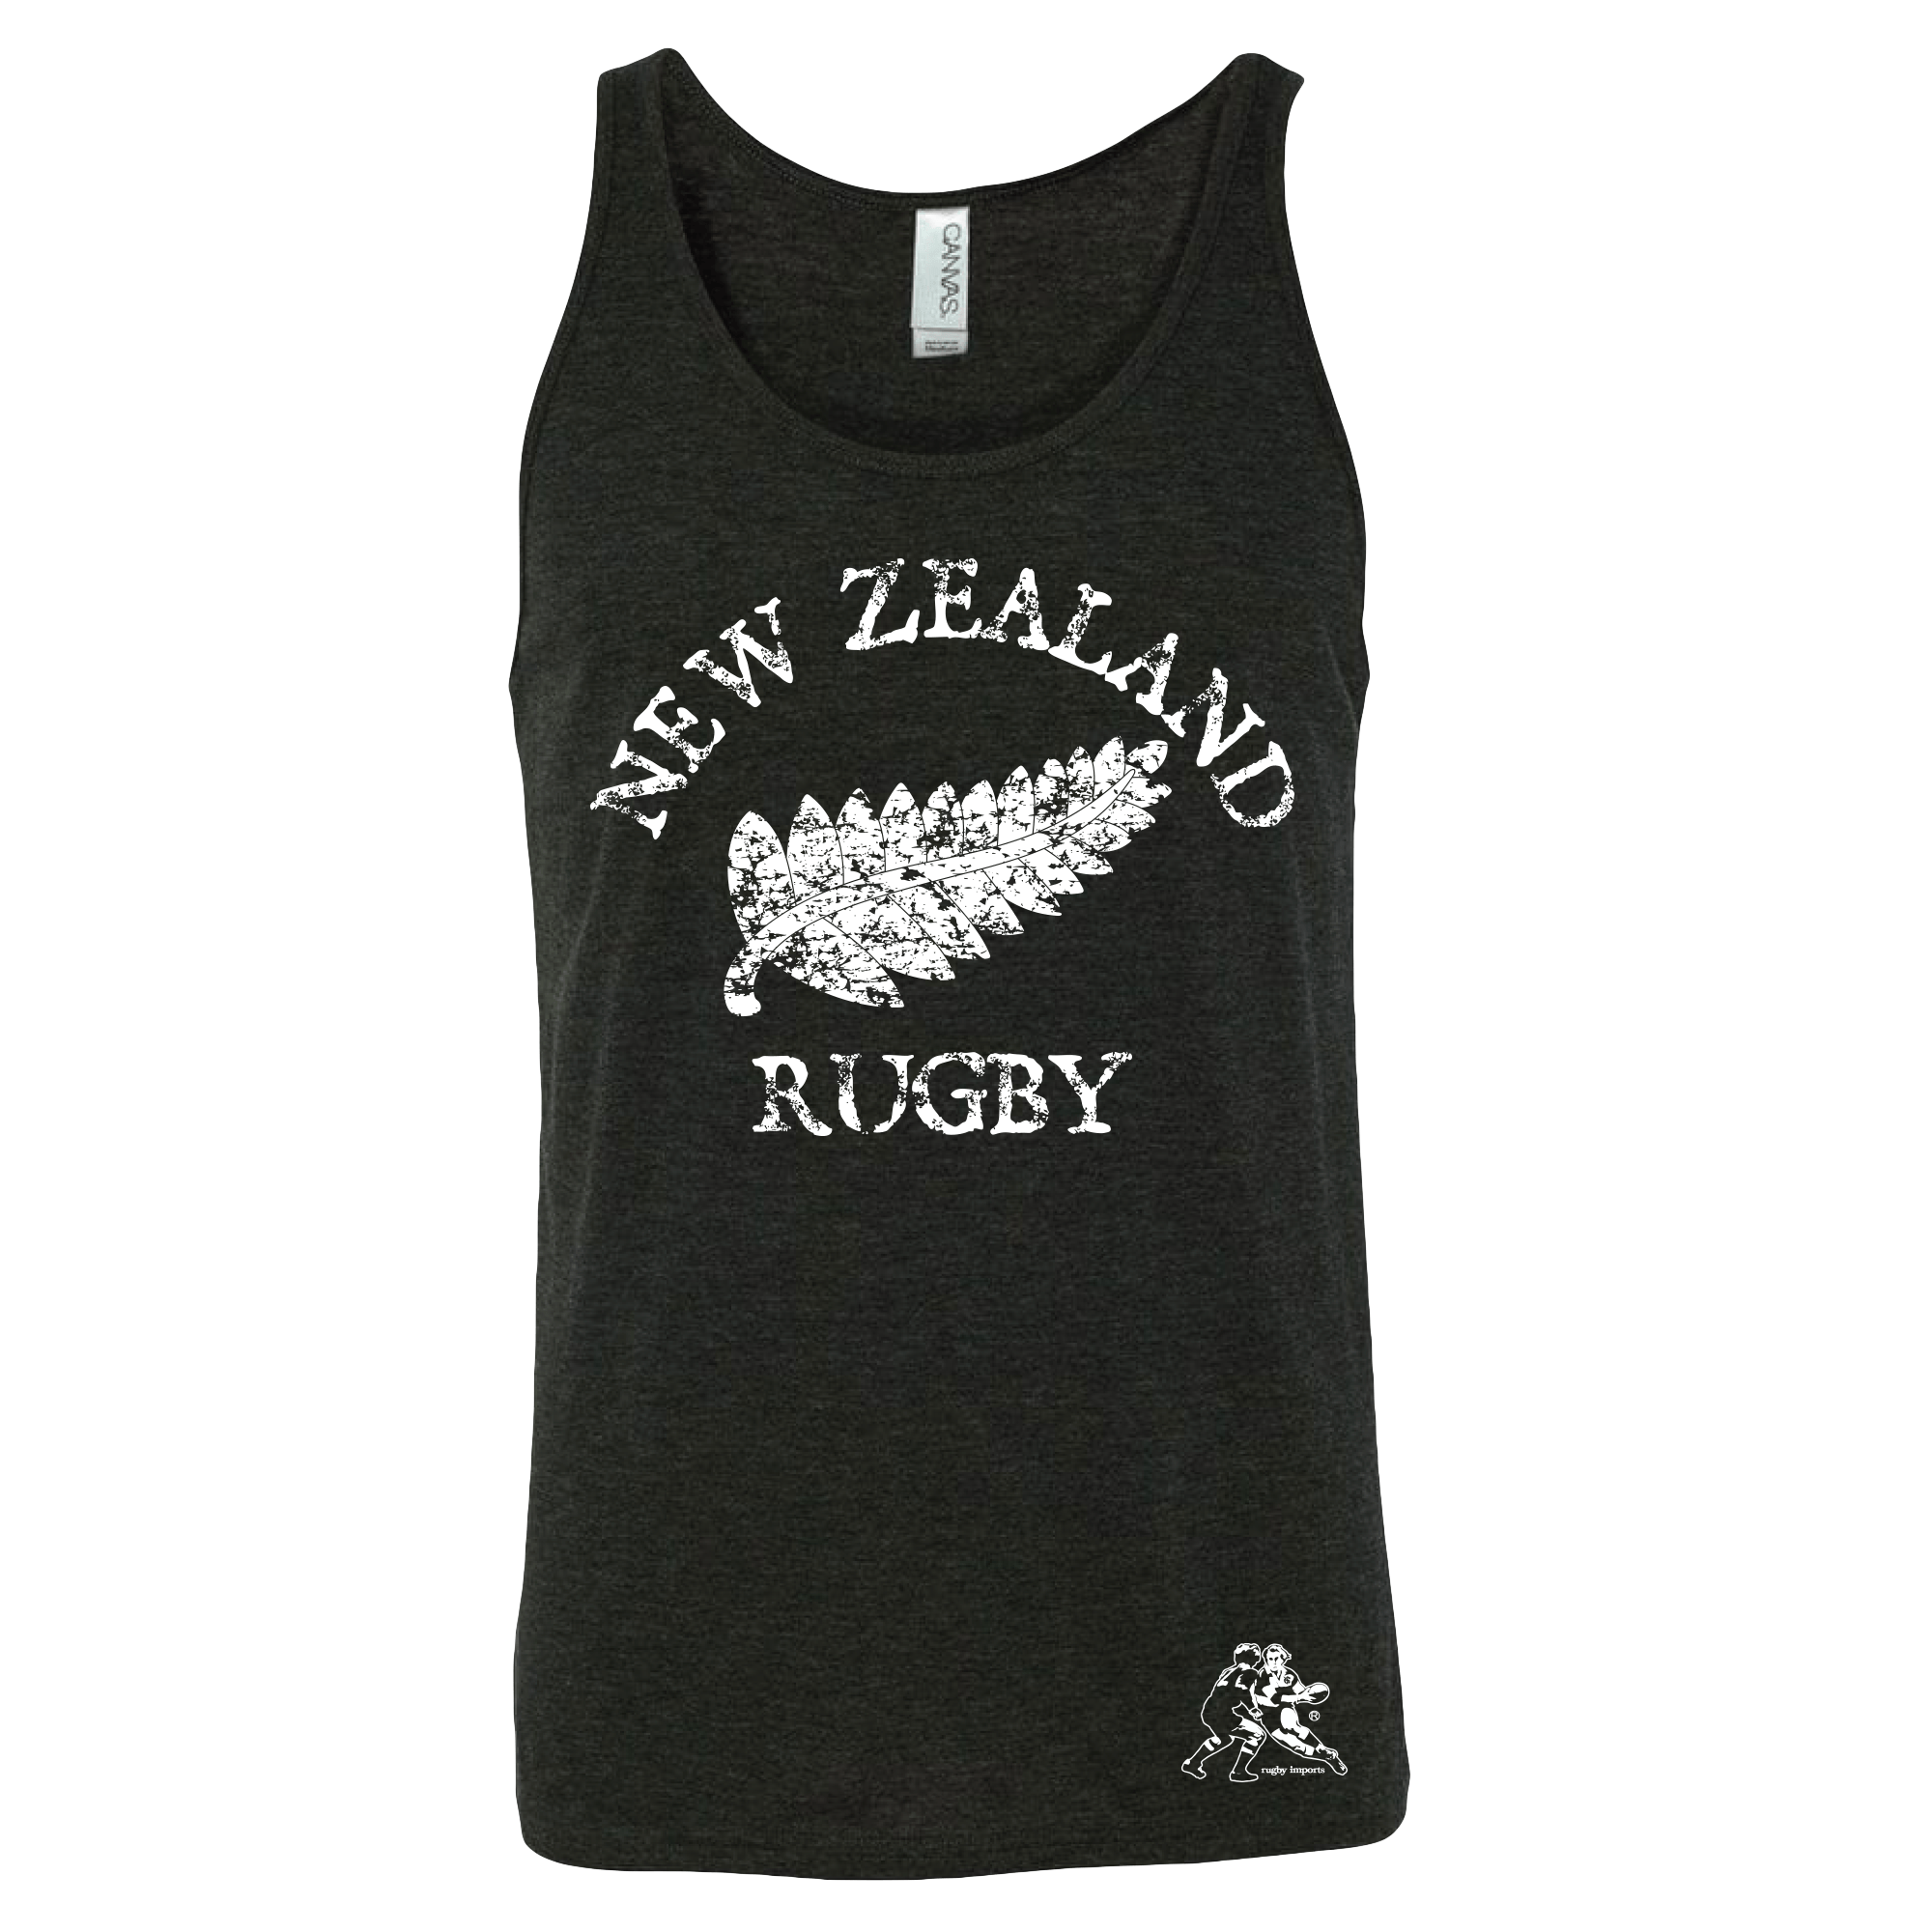 Rugby Imports New Zealand Rugby Logo Tank Top